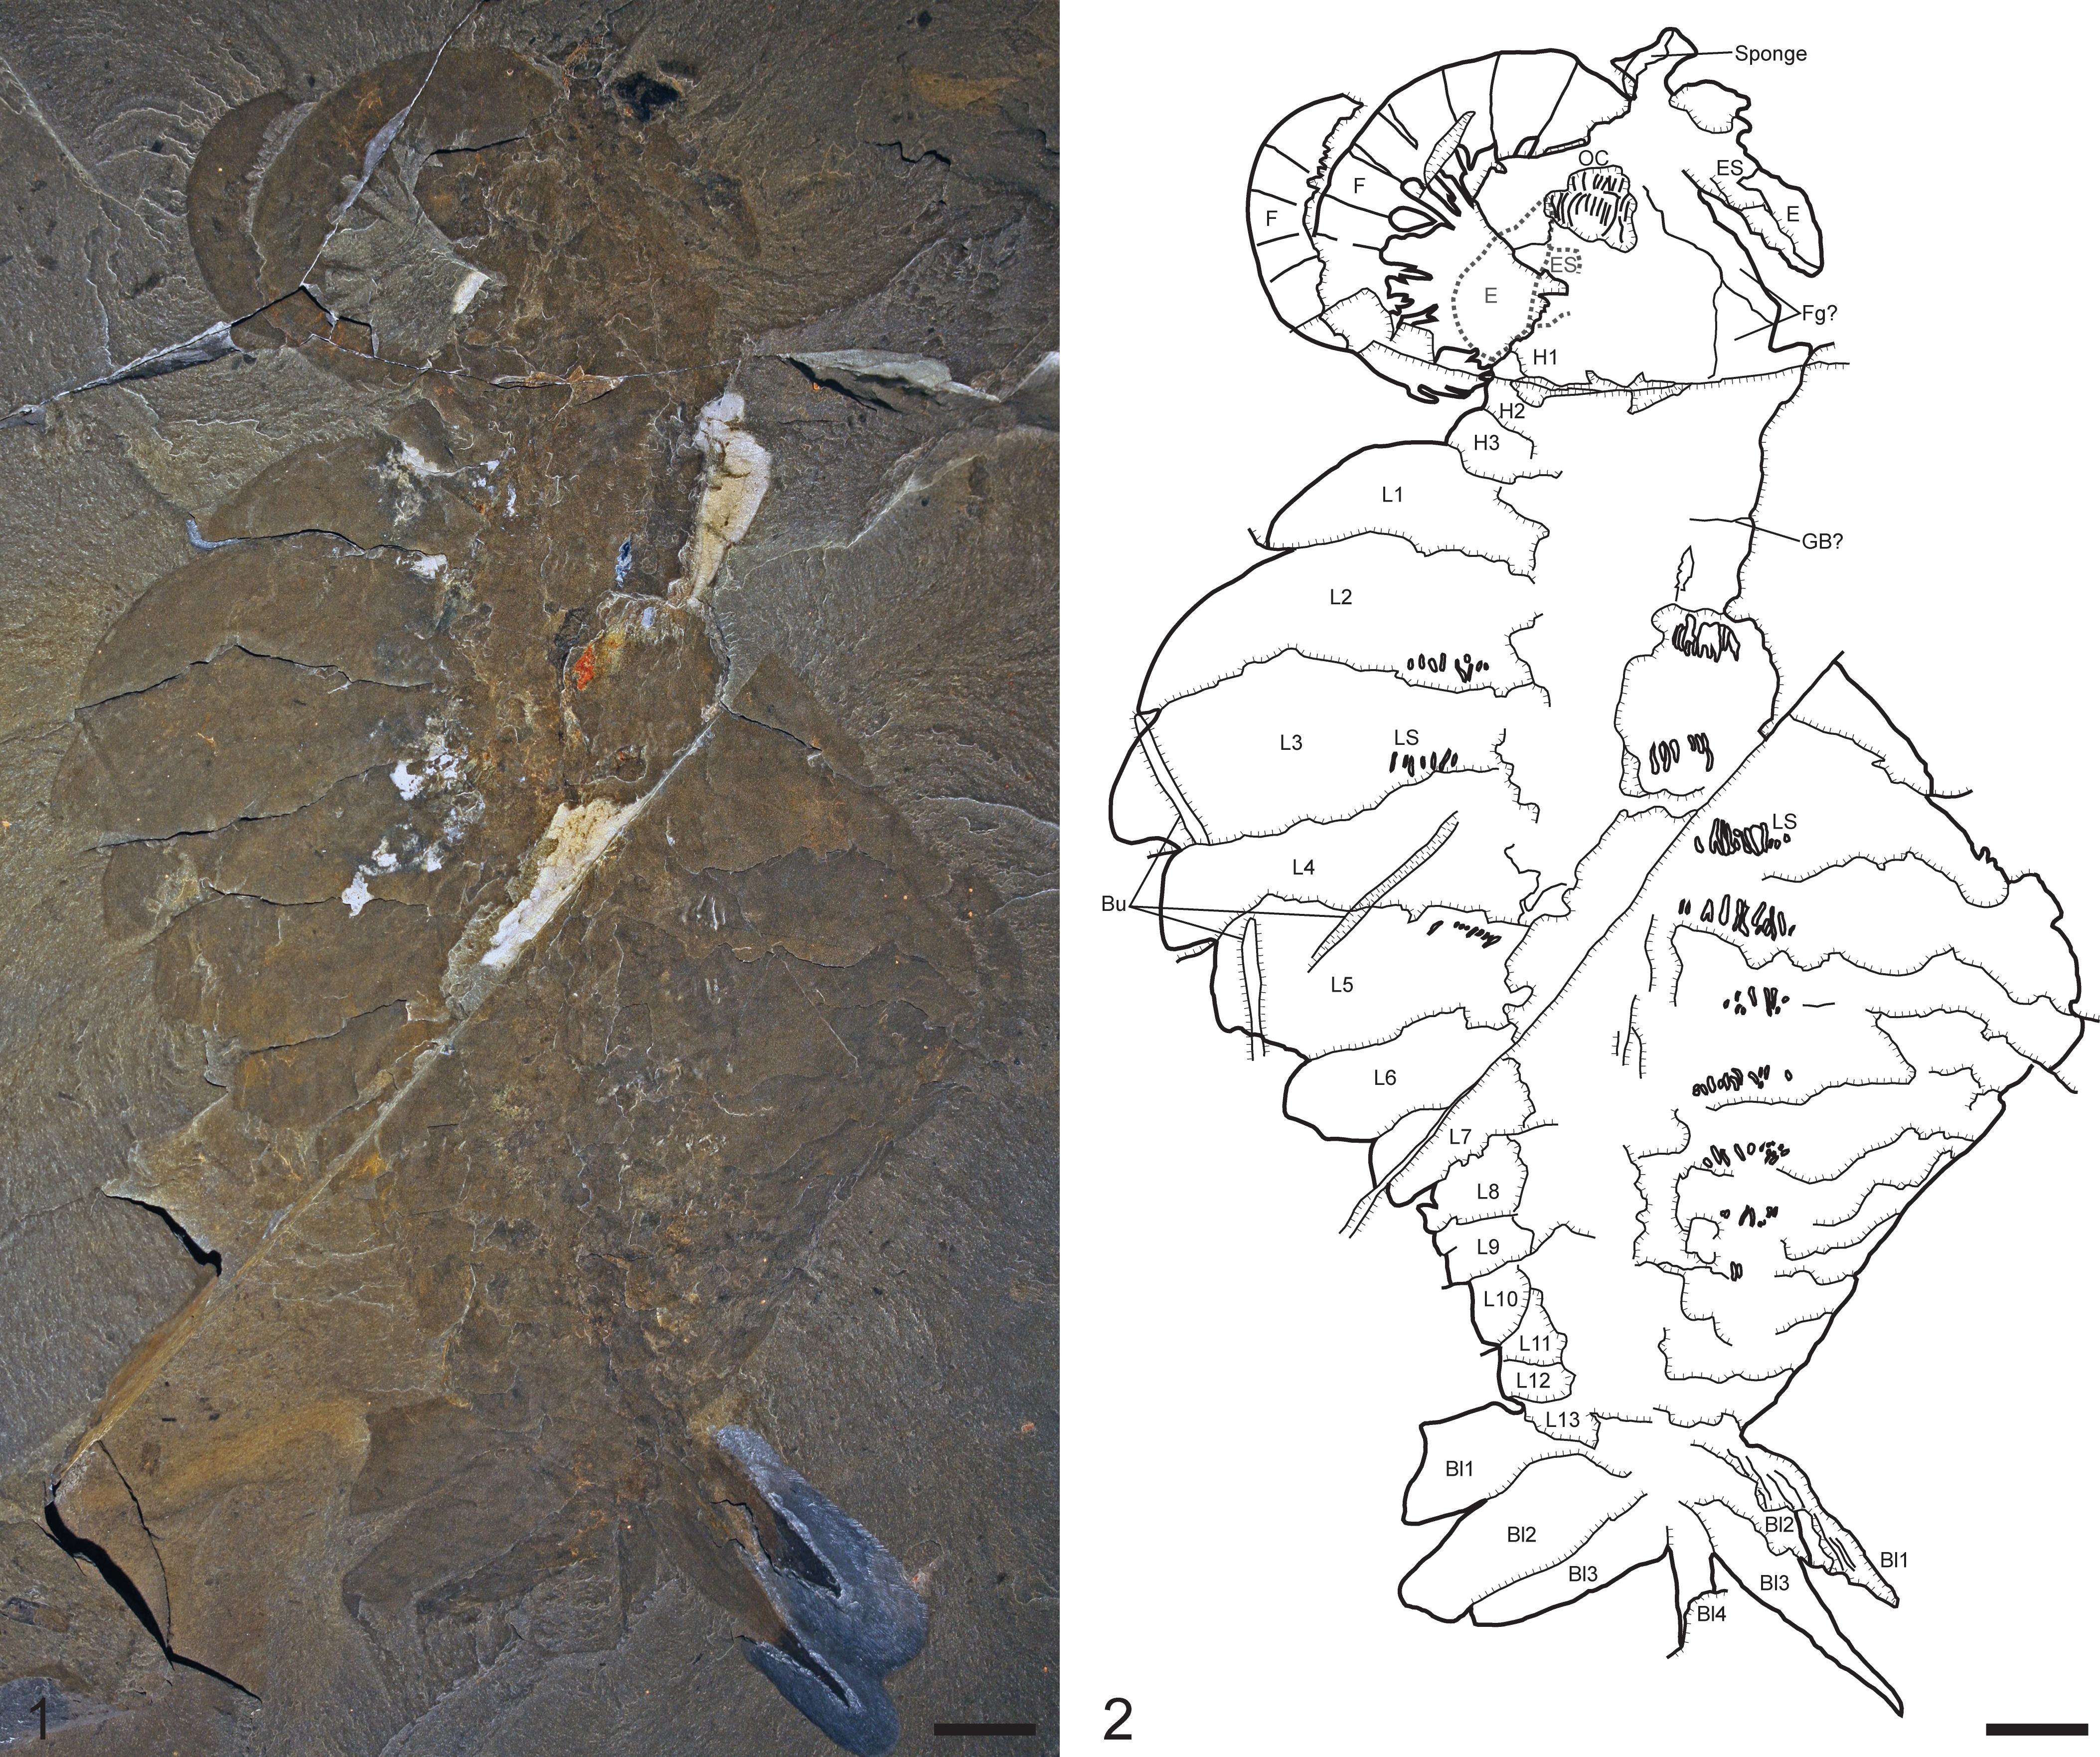 Morphology of Anomalocaris canadensis from the Burgess Shale